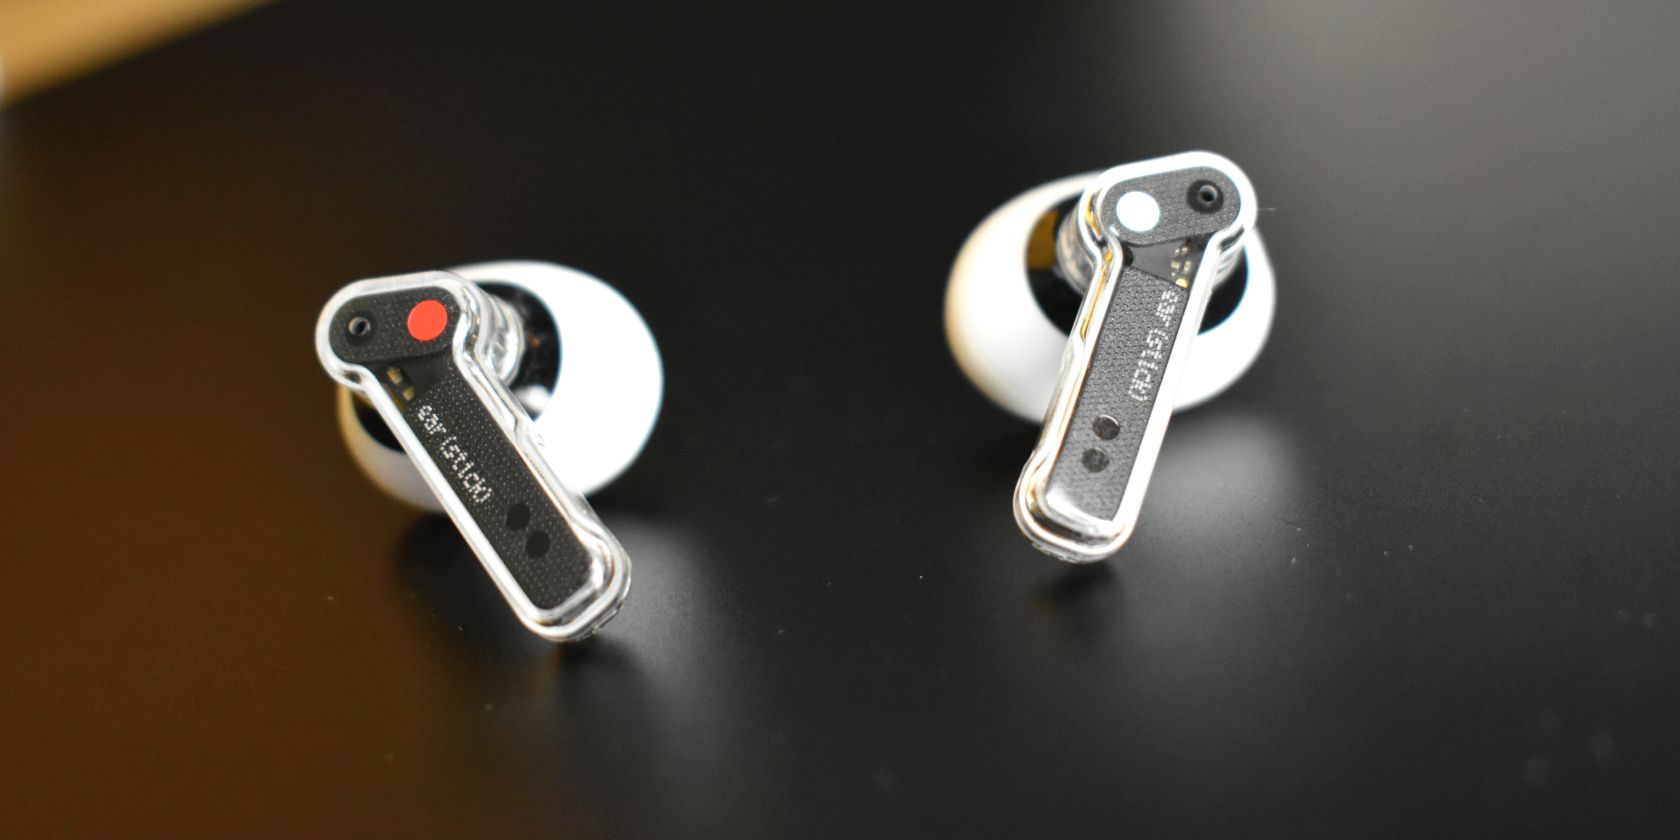 Nothing Ear Stick Review: Exciting Design, but the Fit Holds It Back